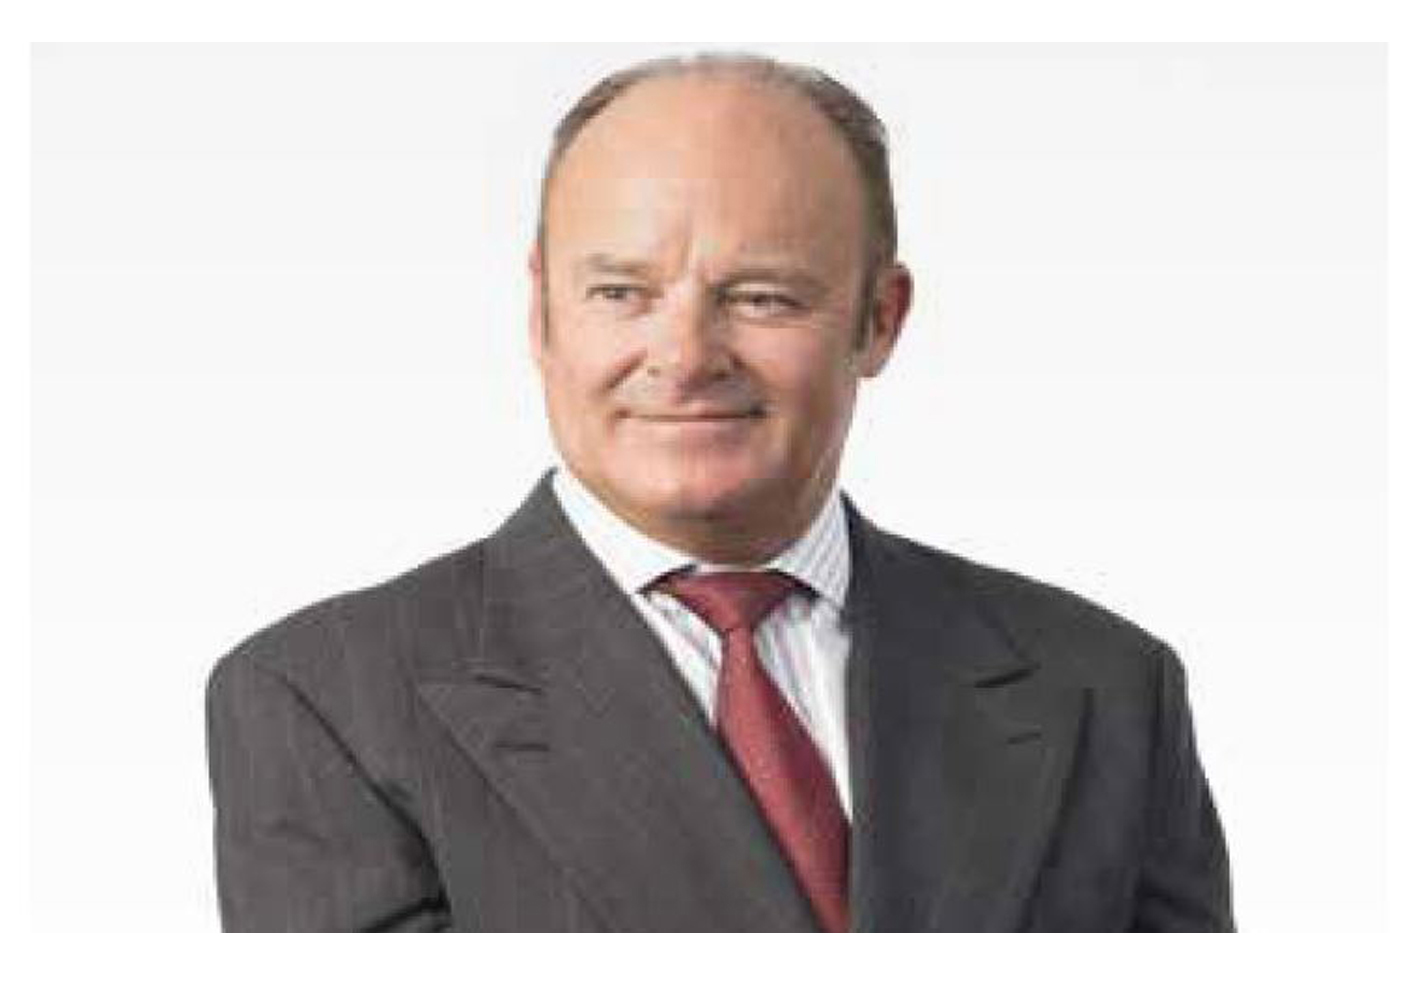 The tragic seaplane crash in Sydney, Australia has claimed the lives of Compass Group Chief Executive Richard Cousins along with members of his family